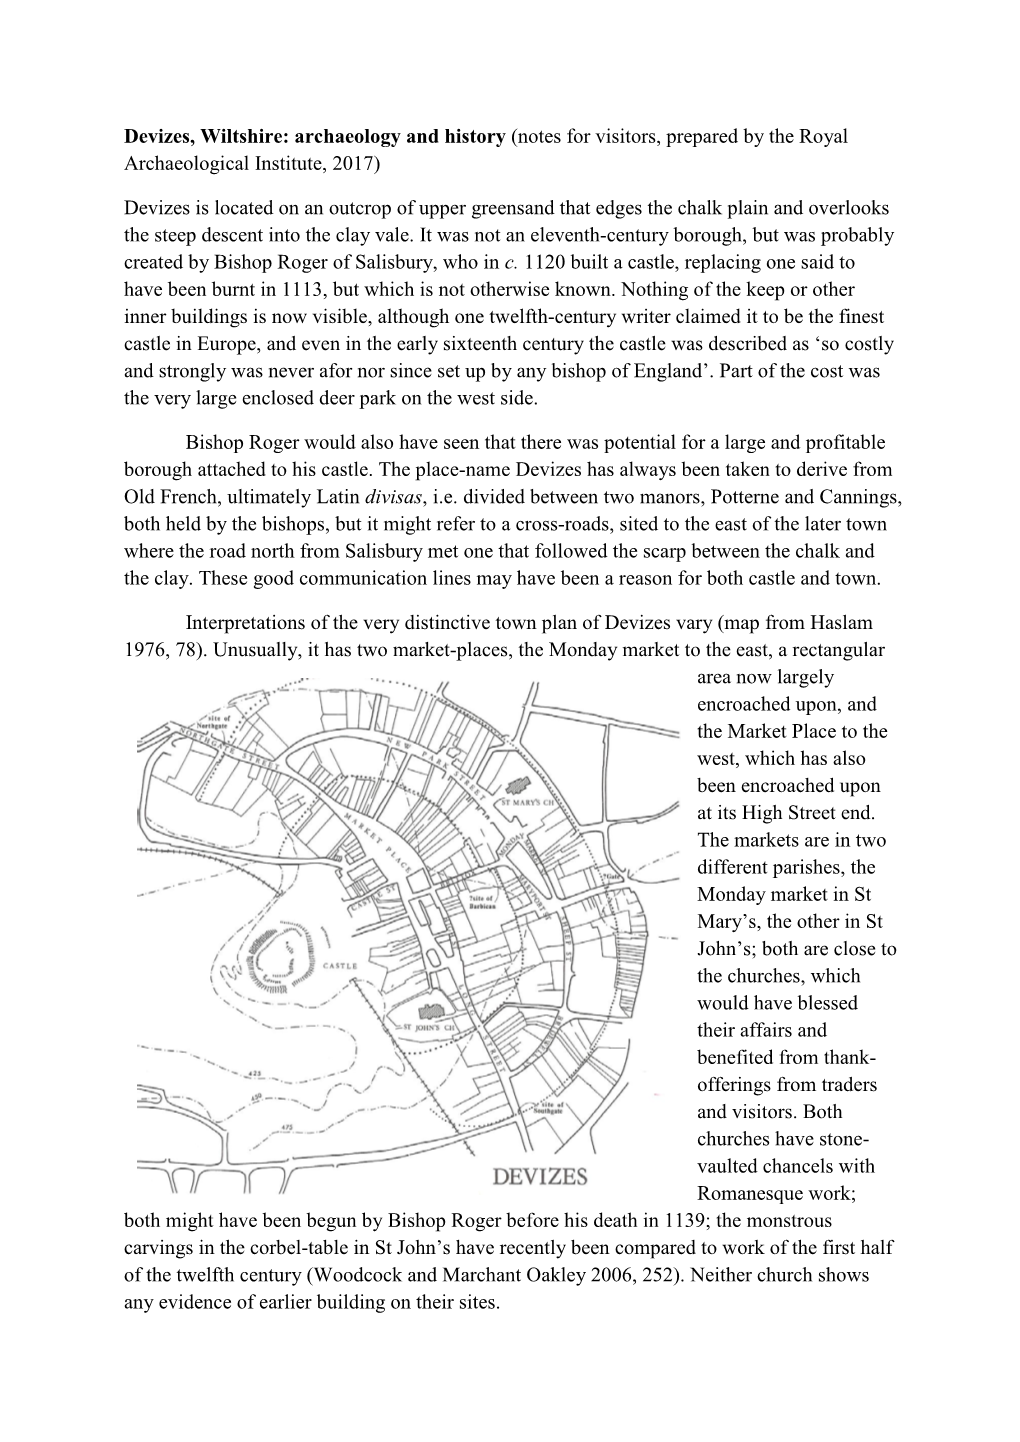 Devizes, Wiltshire: Archaeology and History (Notes for Visitors, Prepared by the Royal Archaeological Institute, 2017)